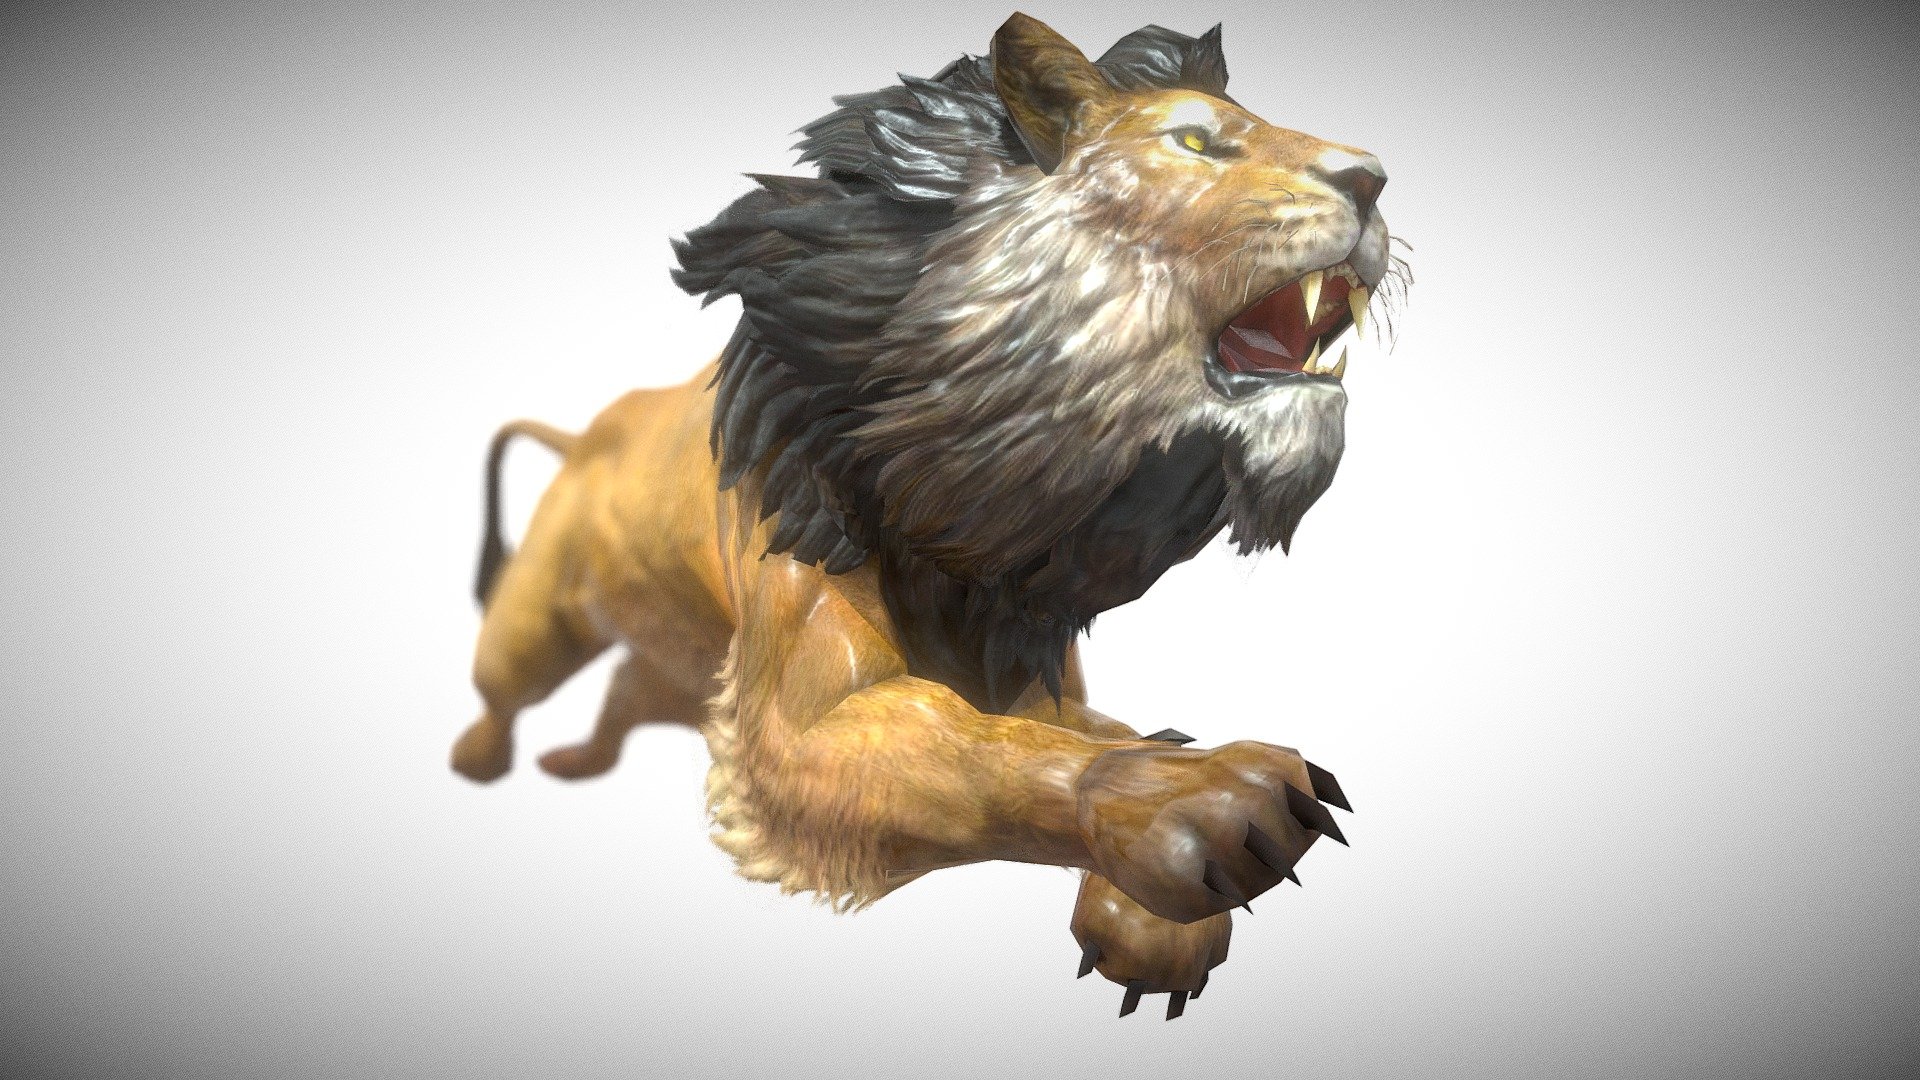 Hunting Gameready character , related animations: Walk (2 types), Idle (5 types), Attack (6 types), Die (4 types), Run (6 types), other actions (3 types) - Lion - 3D model by ElectroNick 3d model